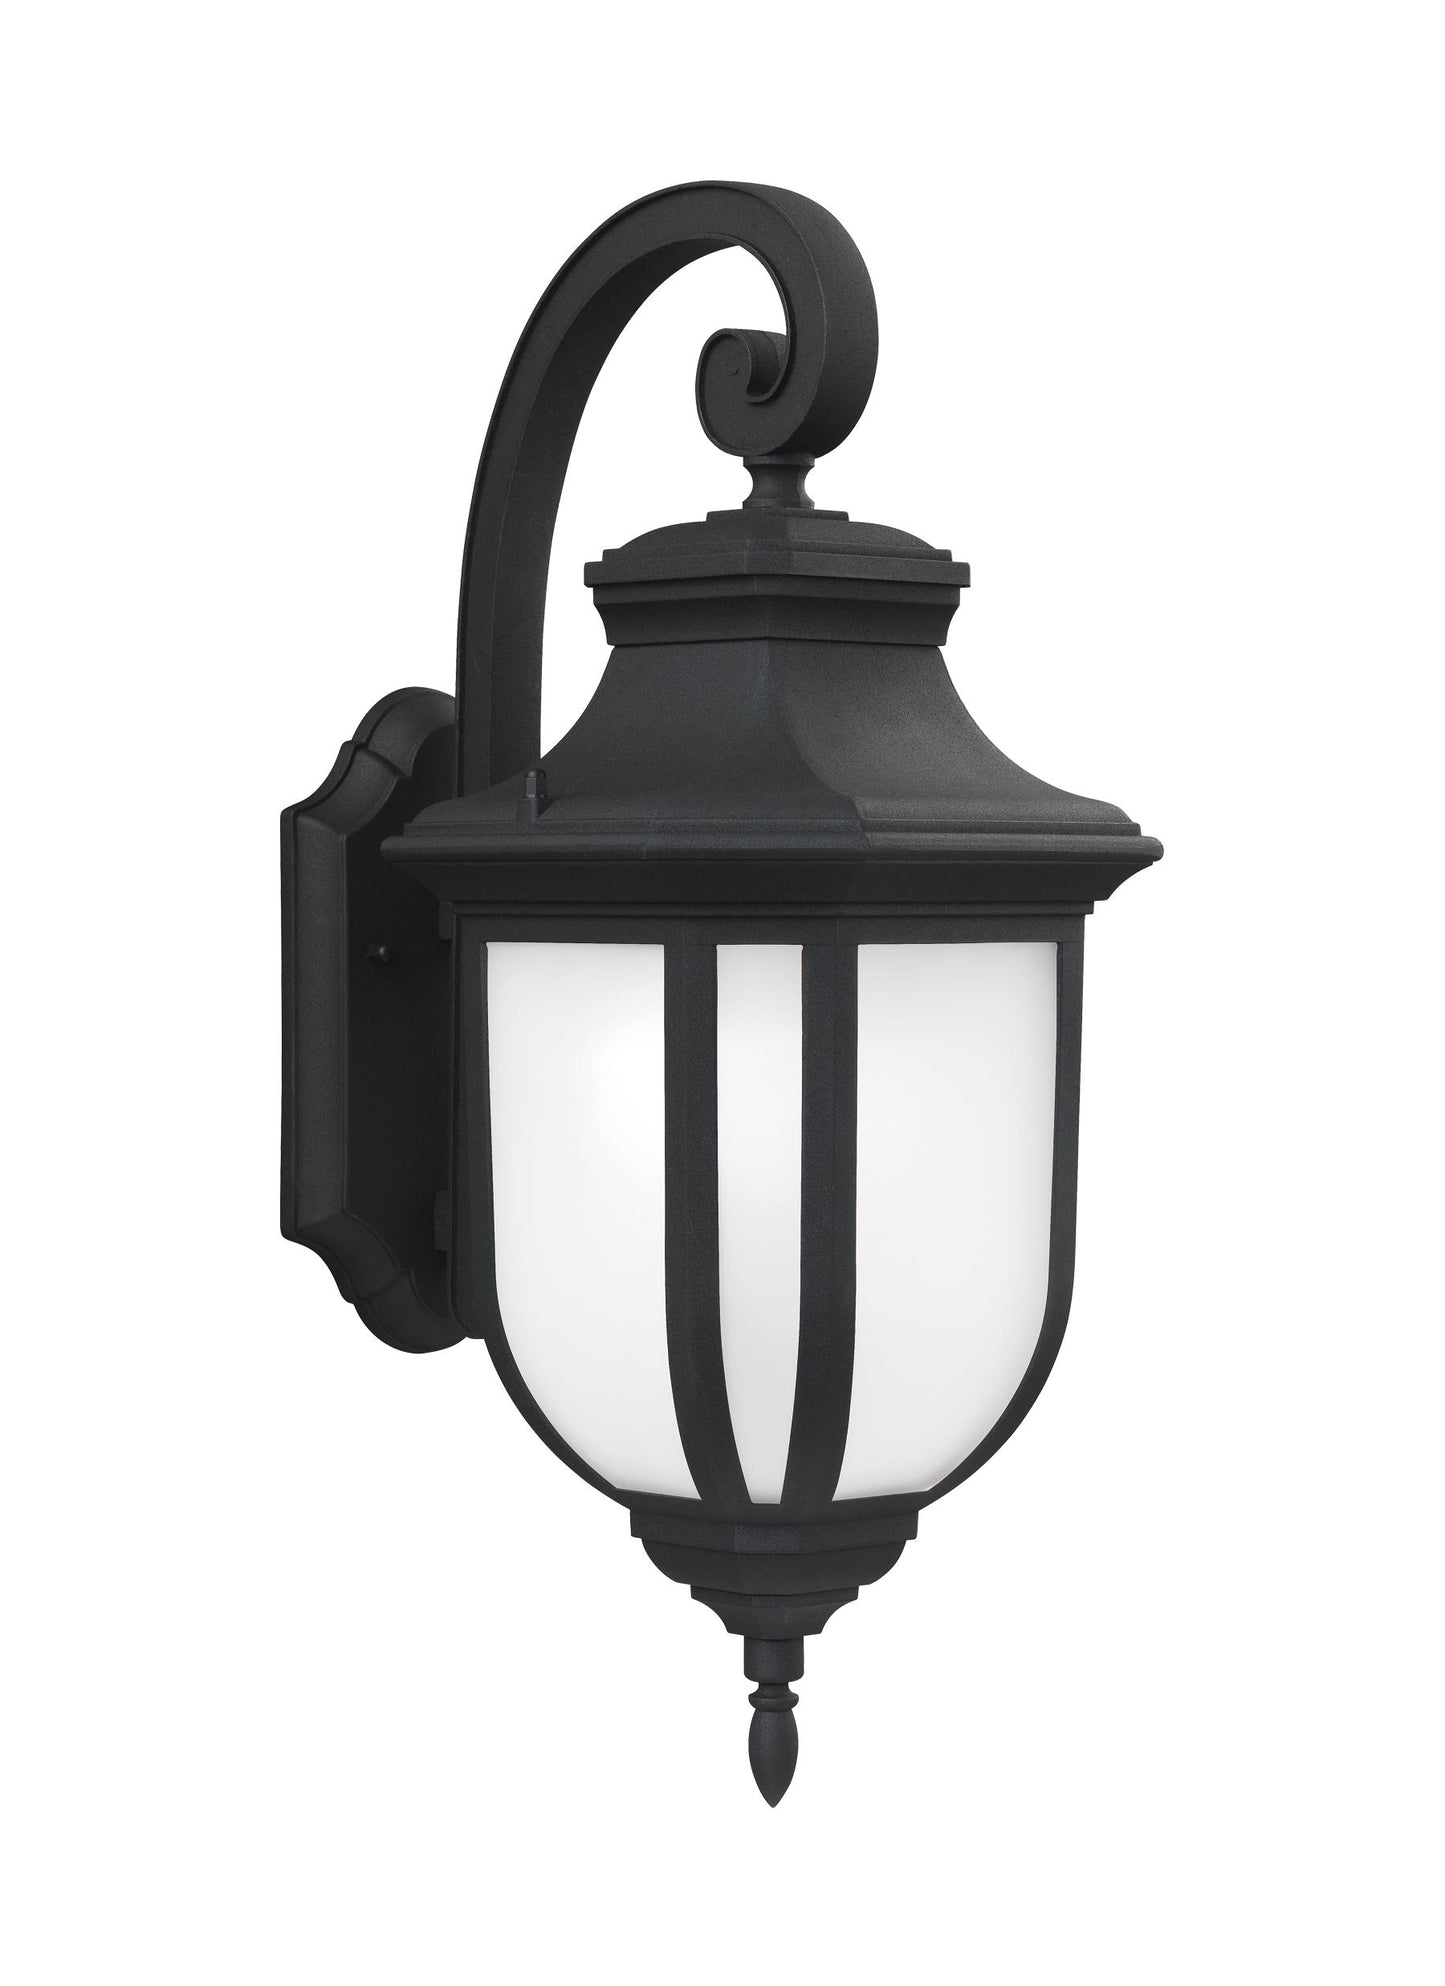 Childress traditional 1-light outdoor exterior large wall lantern sconce in black finish with satin etched glass panels